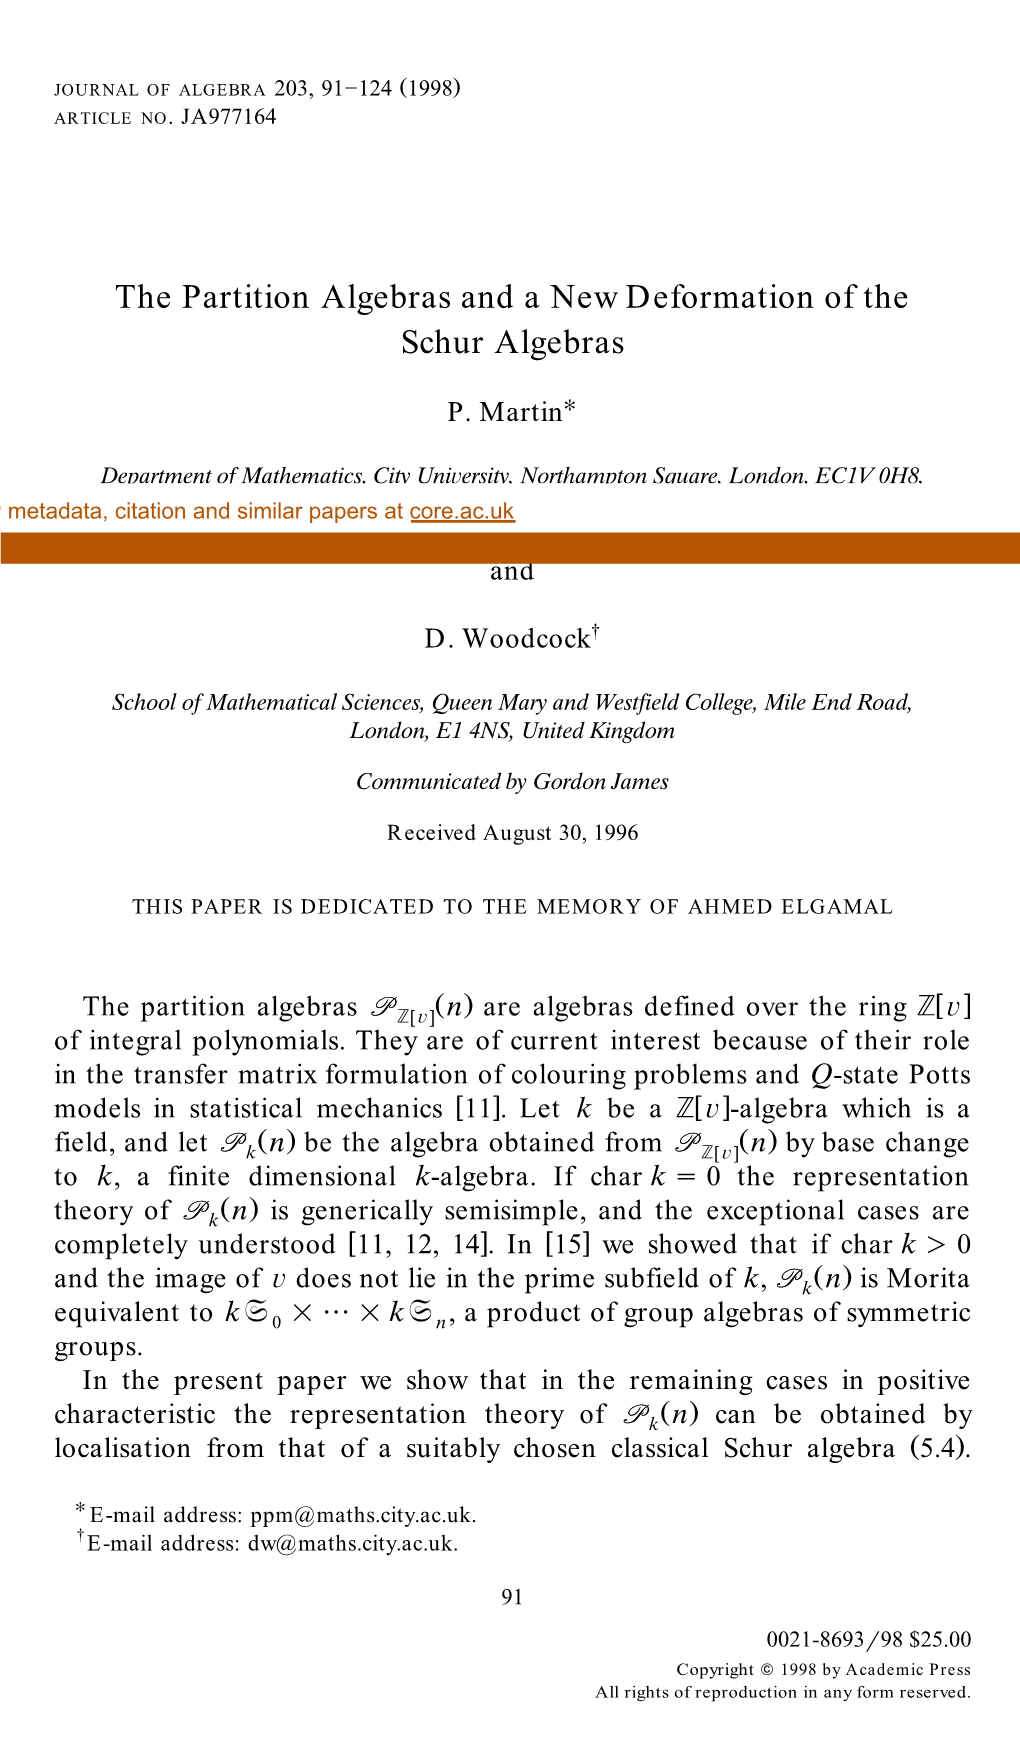 The Partition Algebras and a New Deformation of the Schur Algebras